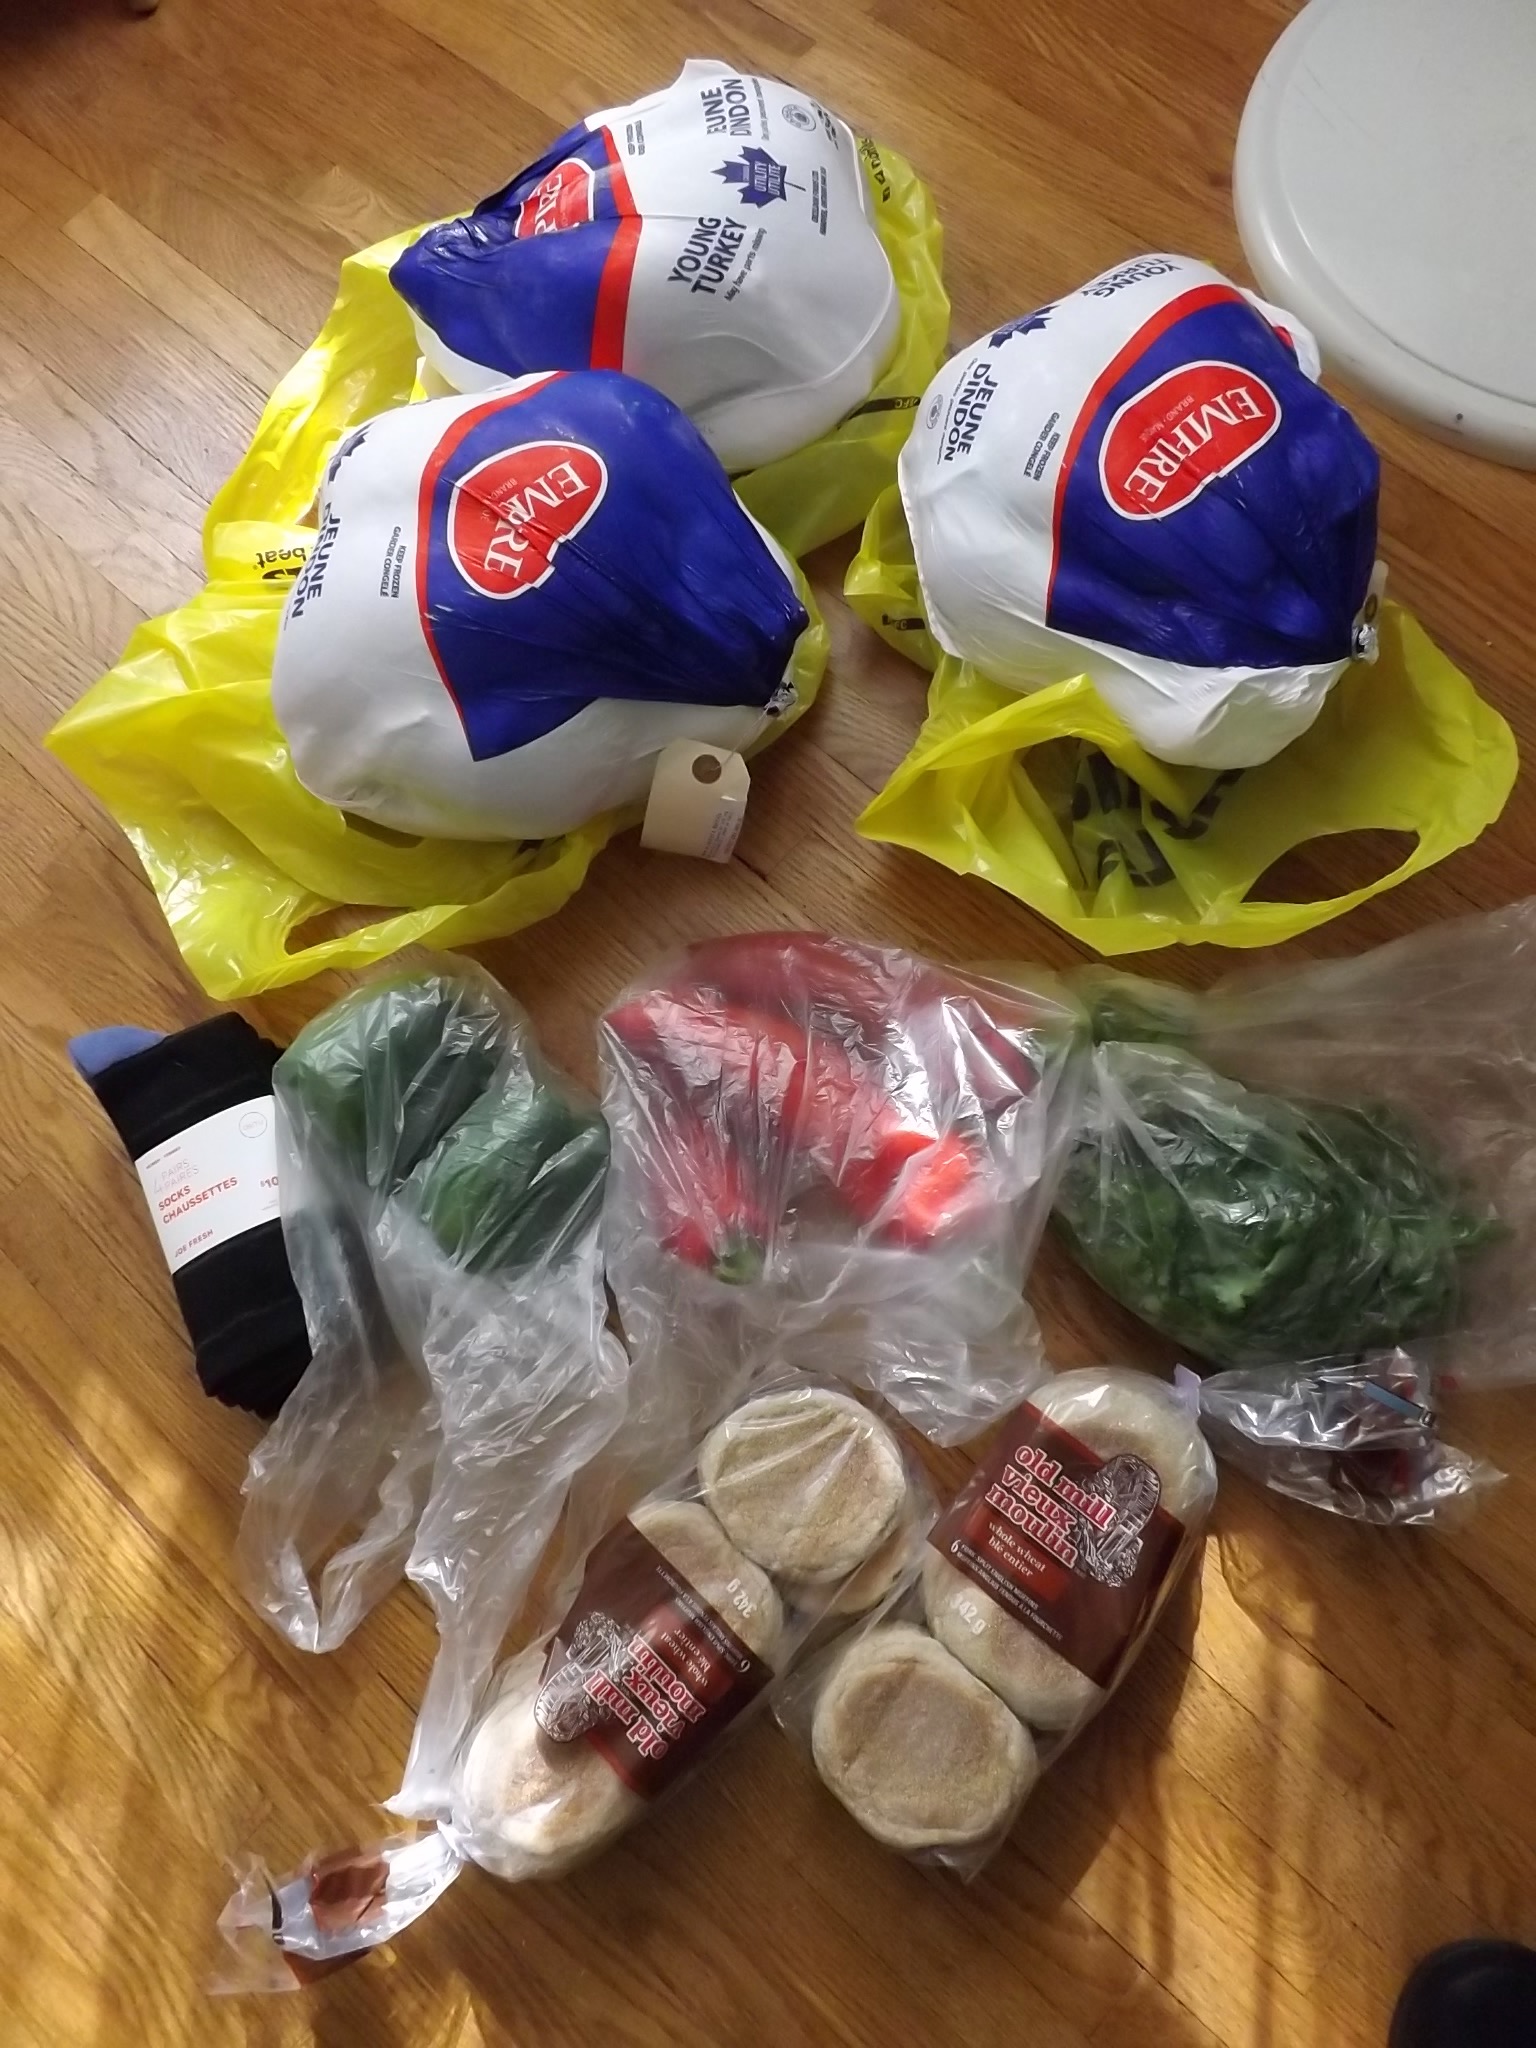 groceries with total cost of 95 cents, includes 3 frozen turkeys, socks, green peppers, red peppers cilantro and two packages of English Muffins.